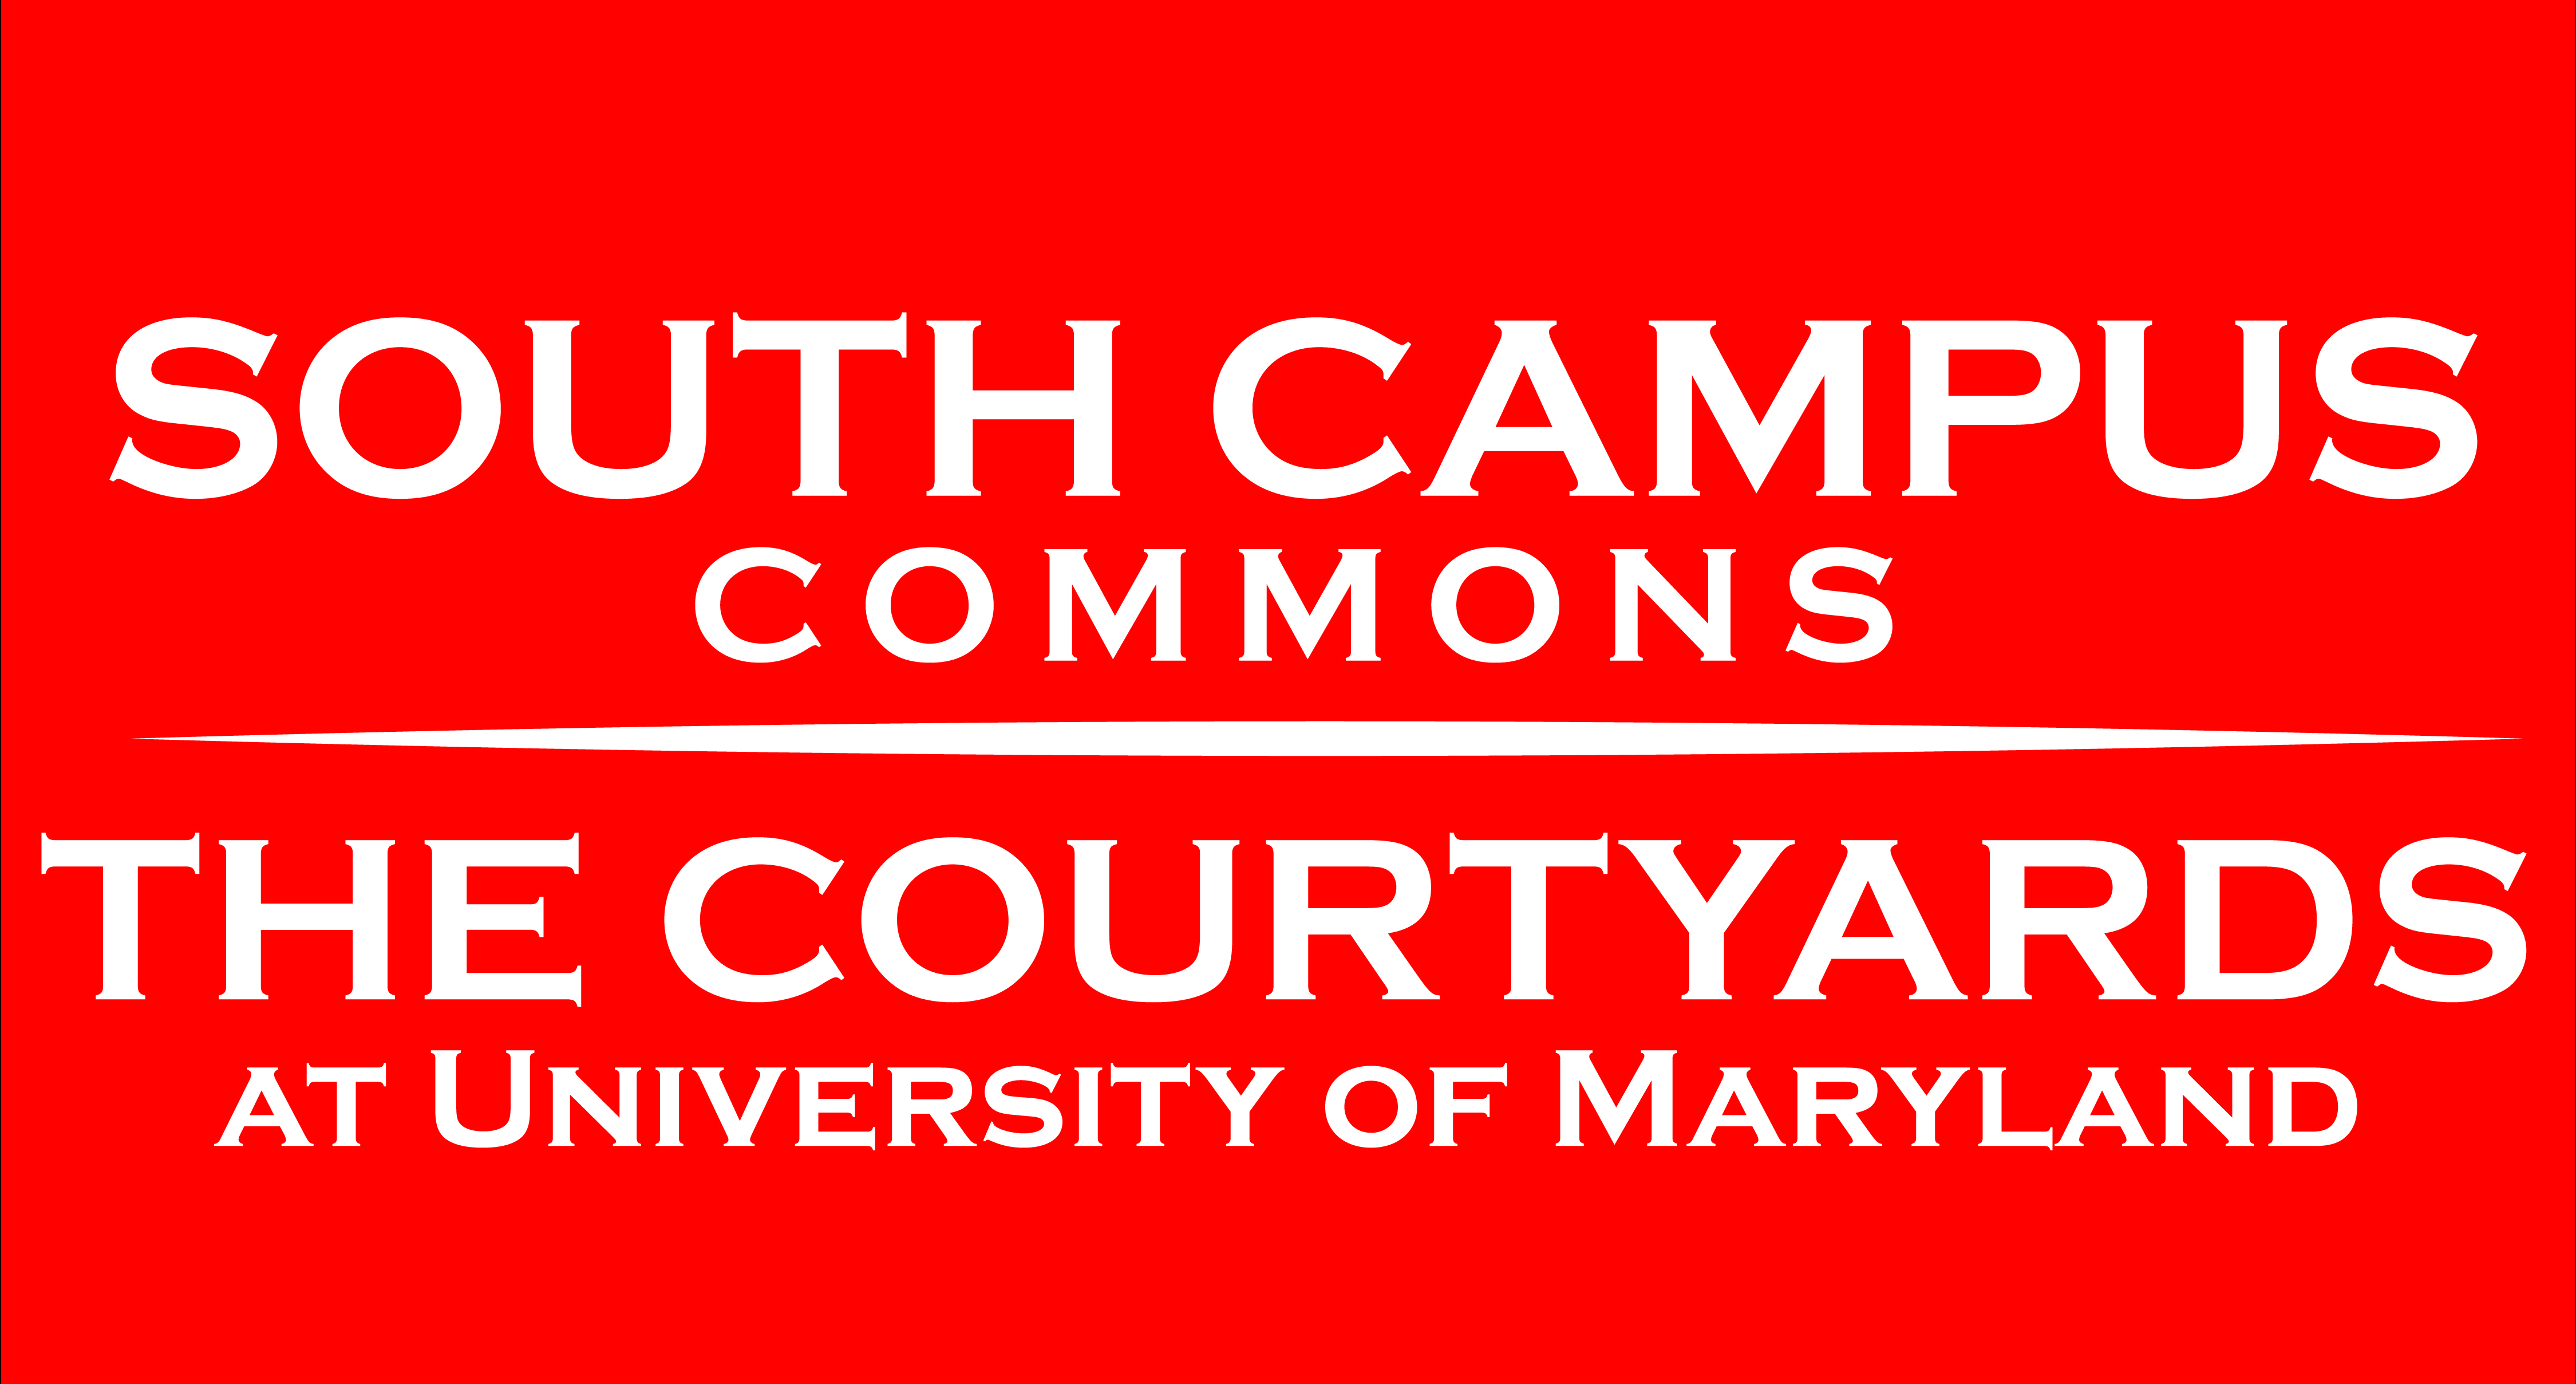 South Campus Commons & Courtyards